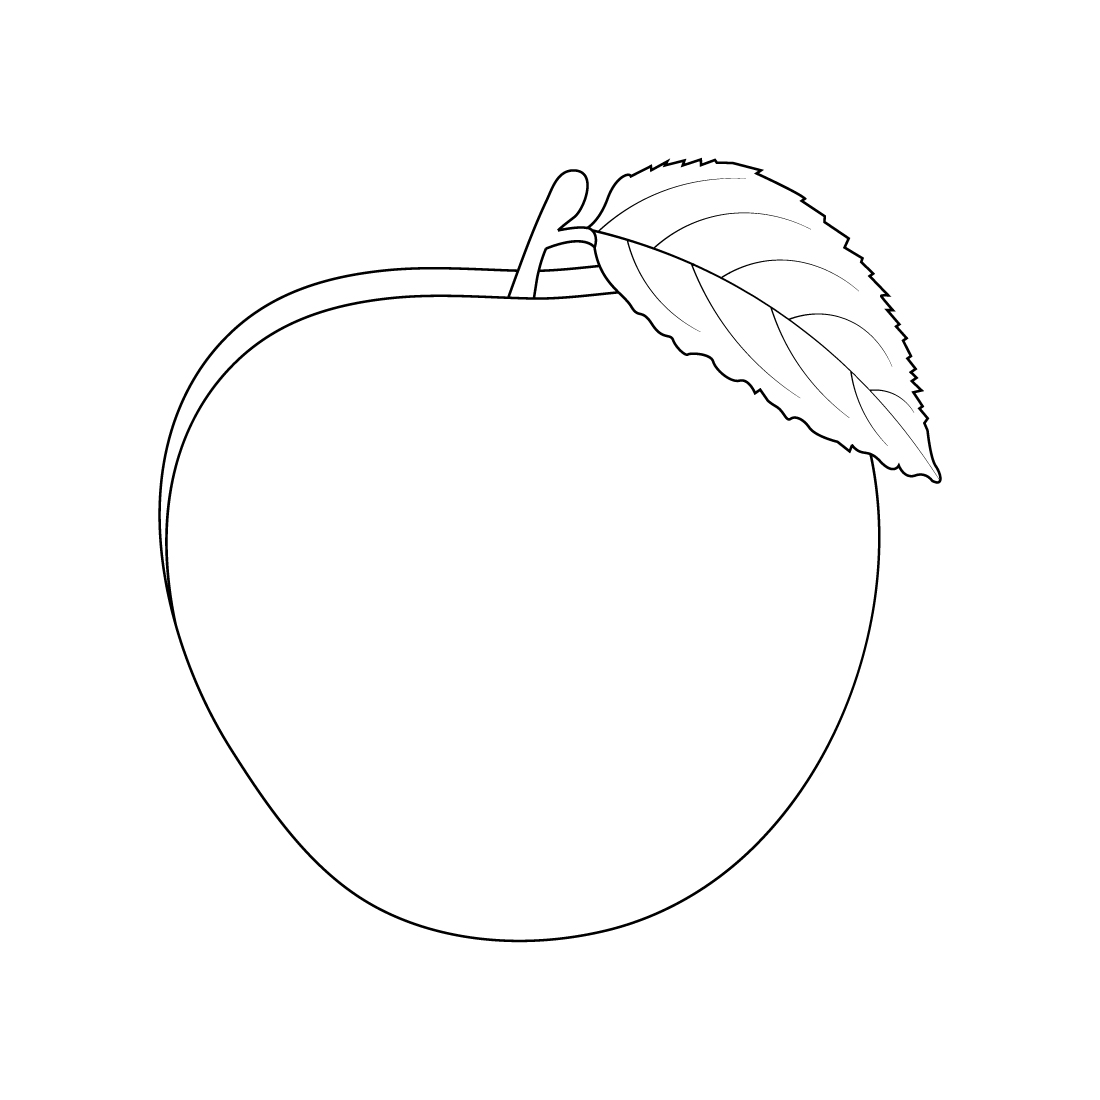 Apple Fruits Coloring Page For Kids preview image.